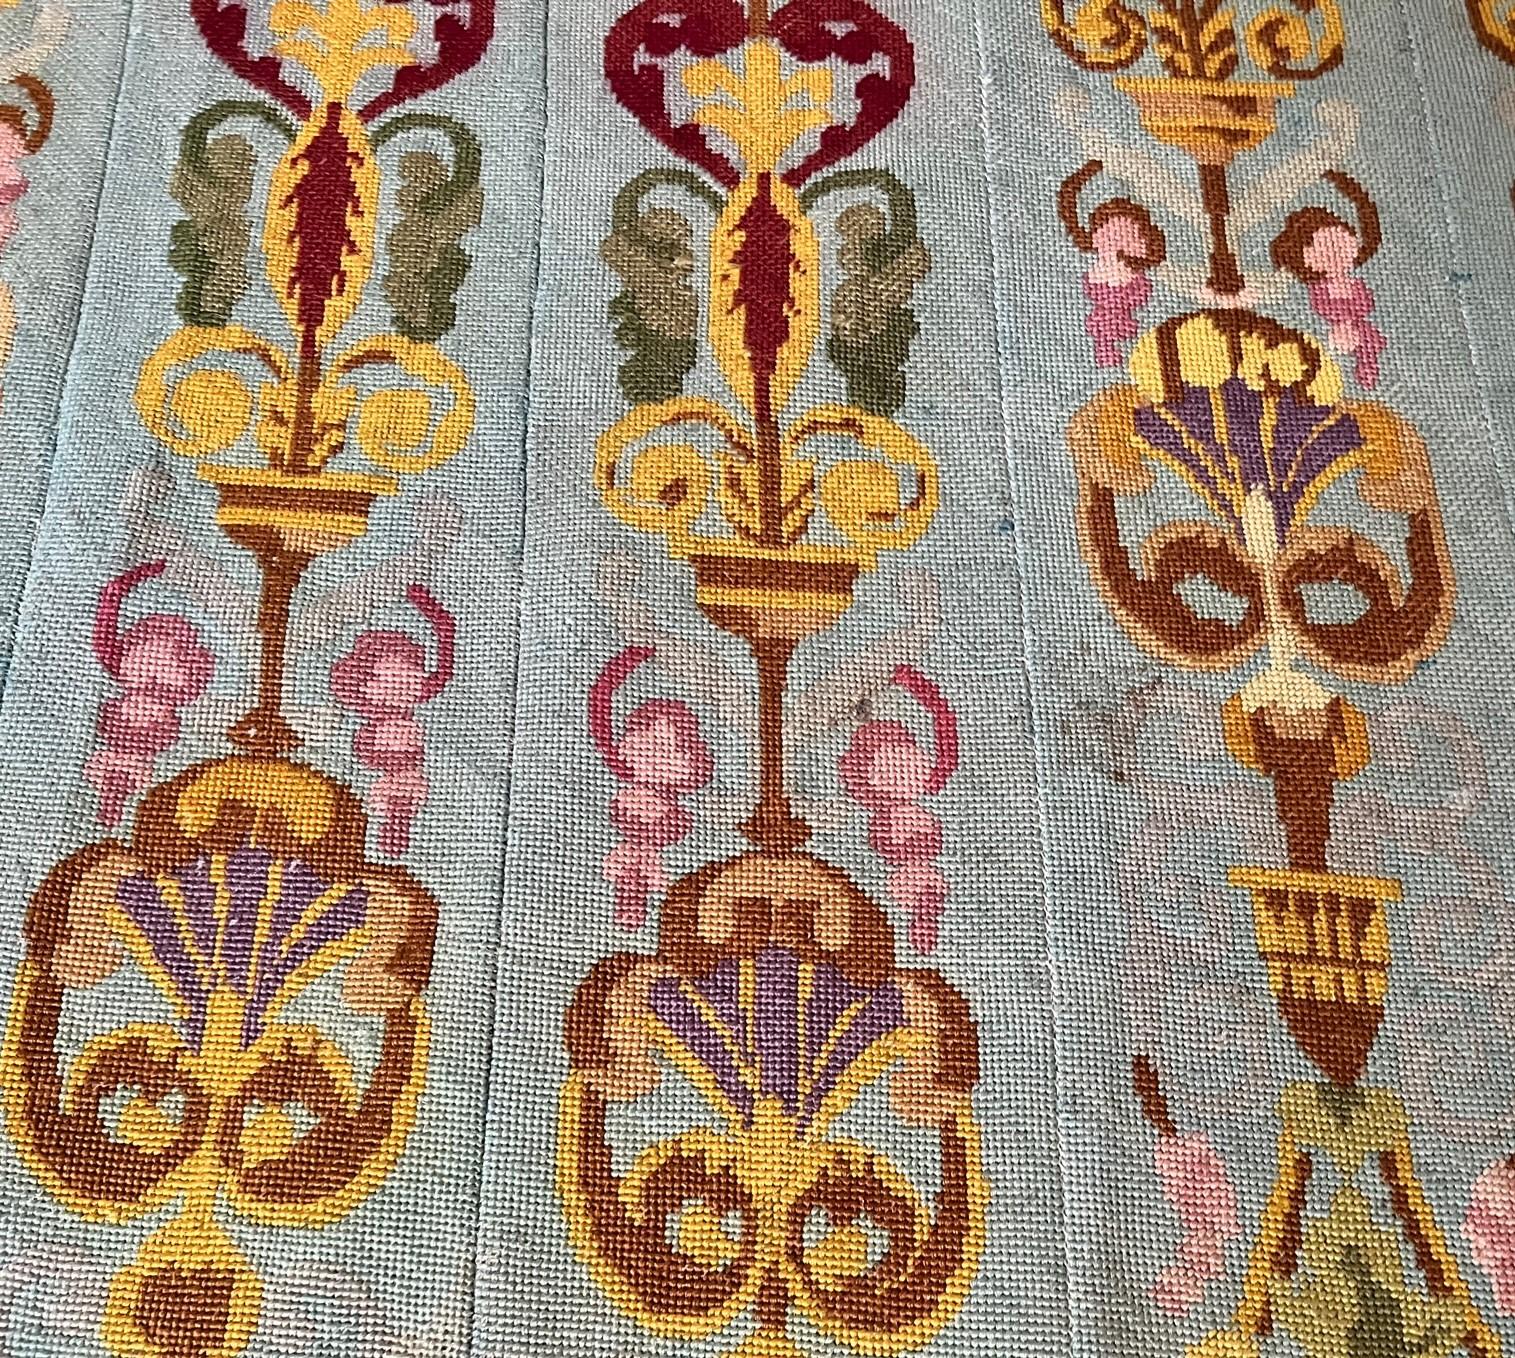 Antique Aubusson-Style Pictorial Tapestry - Urn, Tendril and Crowned Lion Motifs In Good Condition For Sale In Morristown, NJ